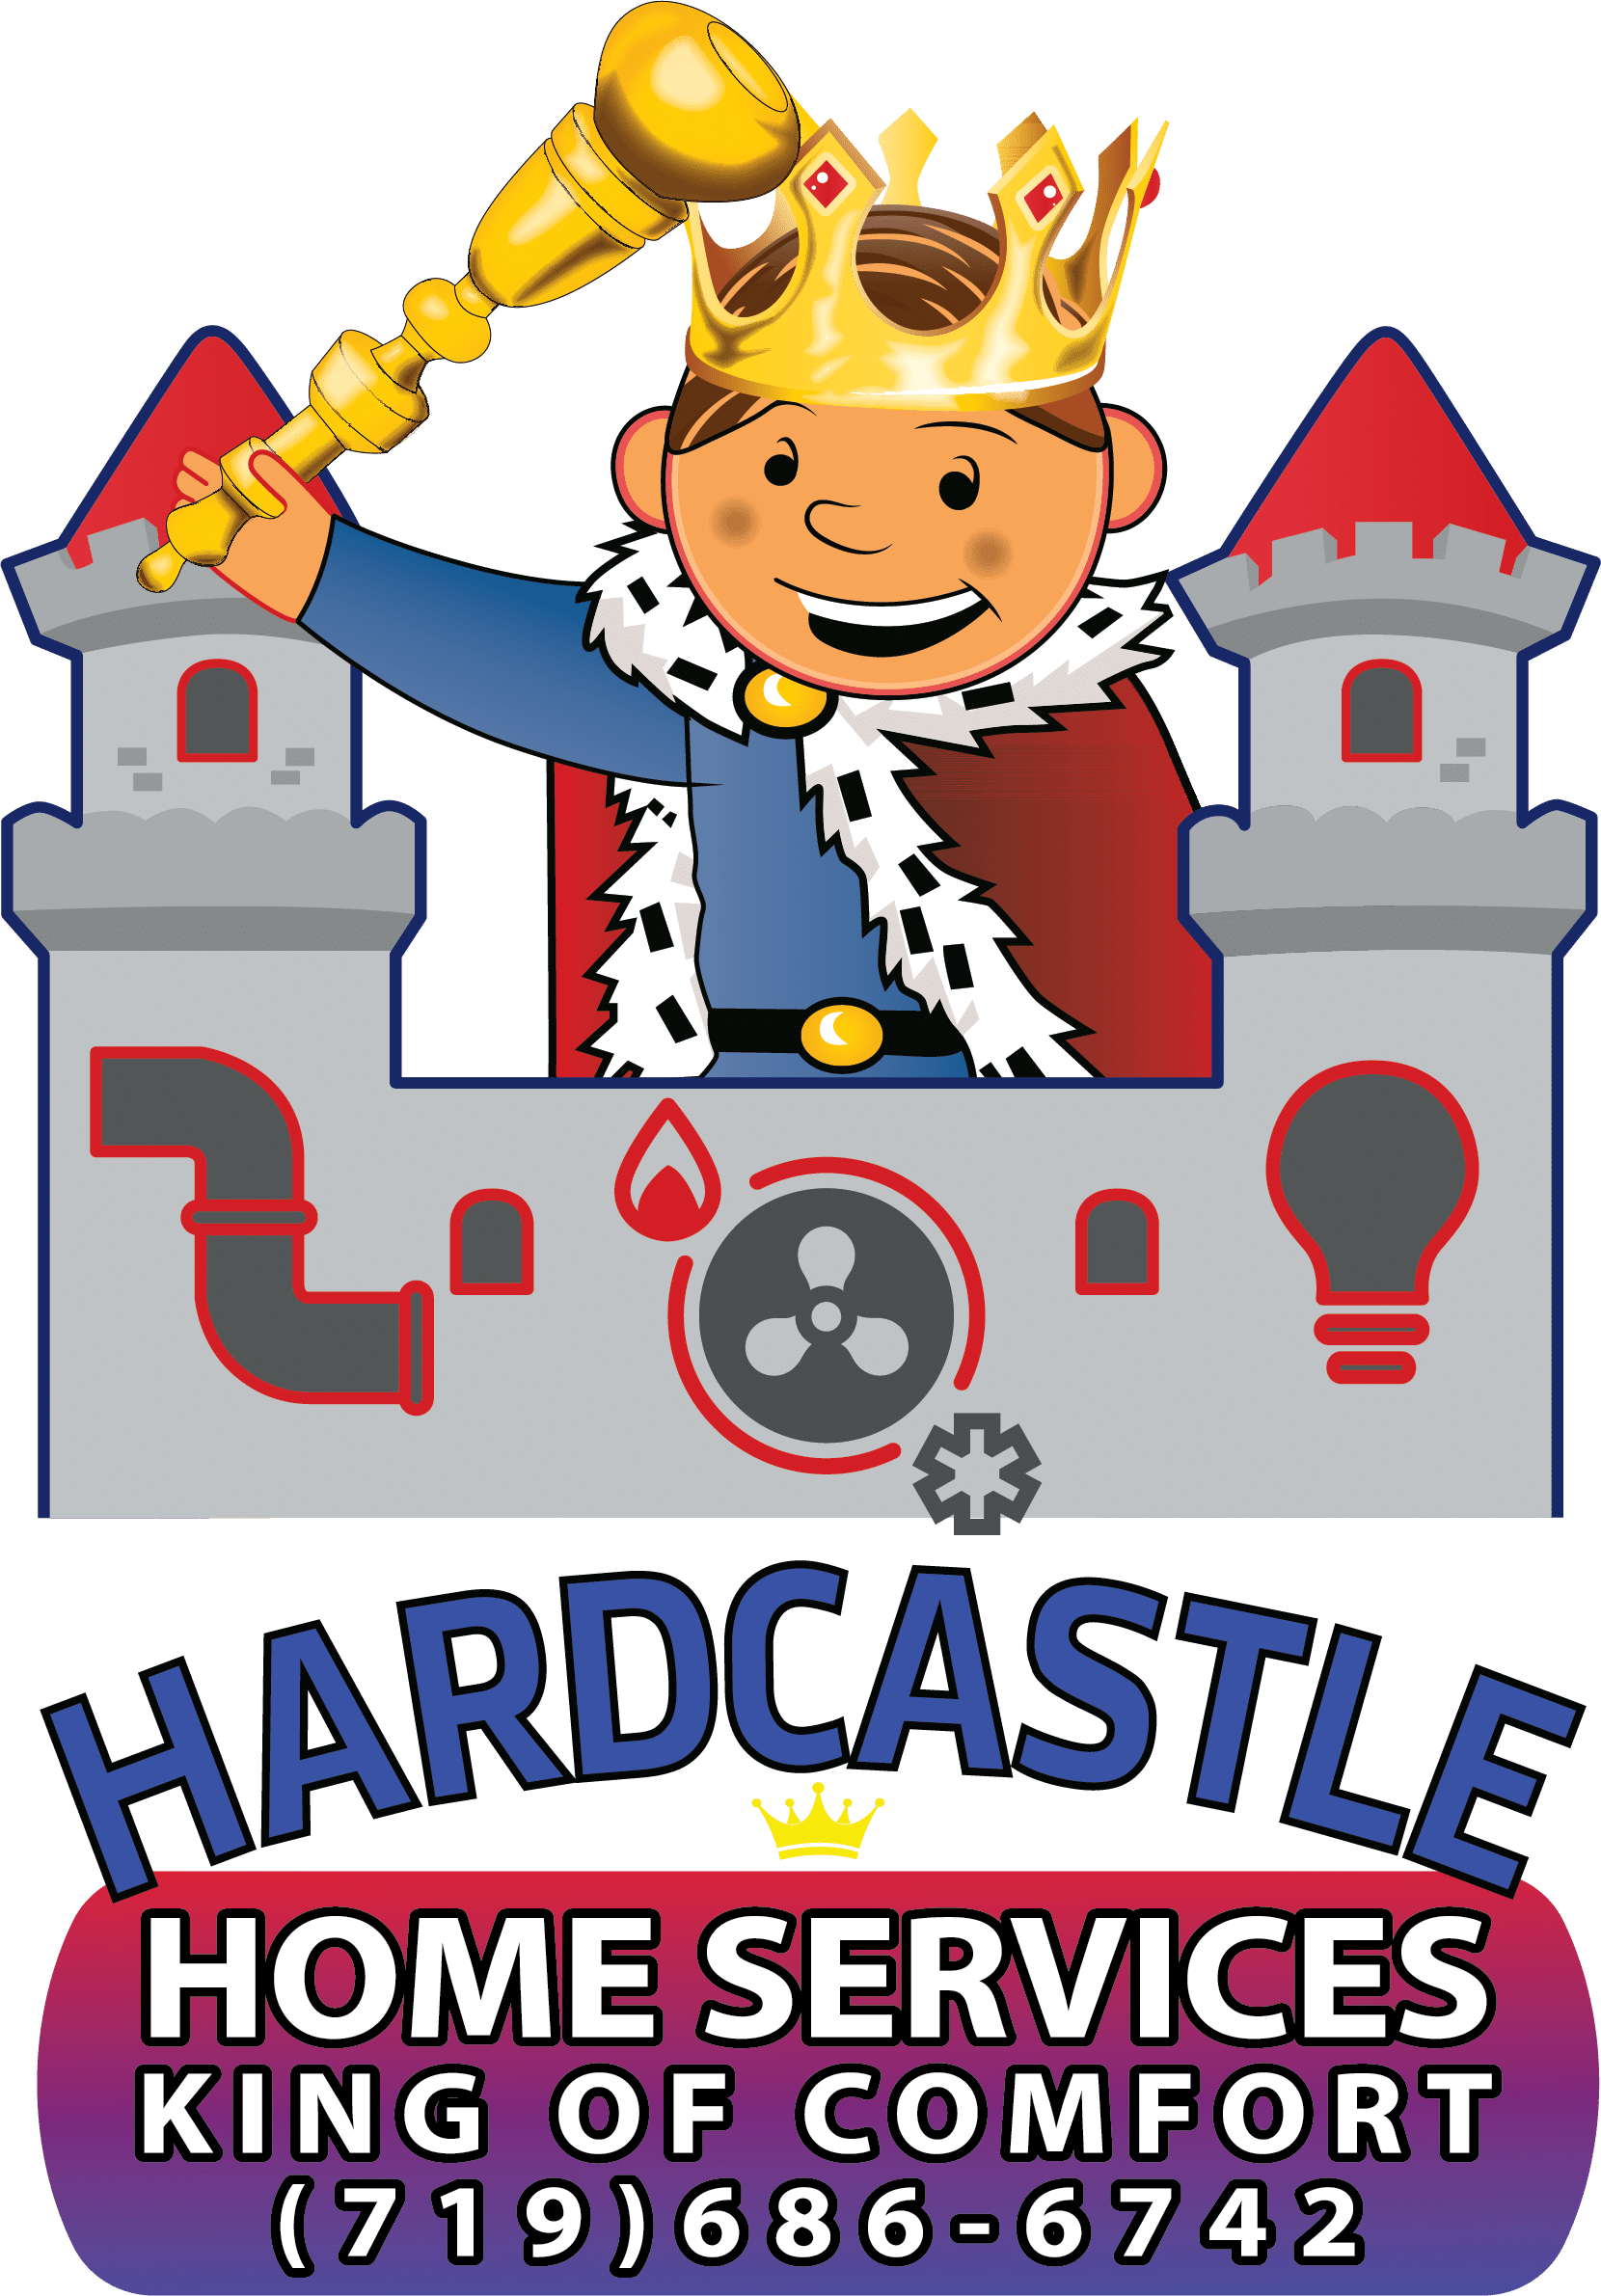 Hardcastle Home Services